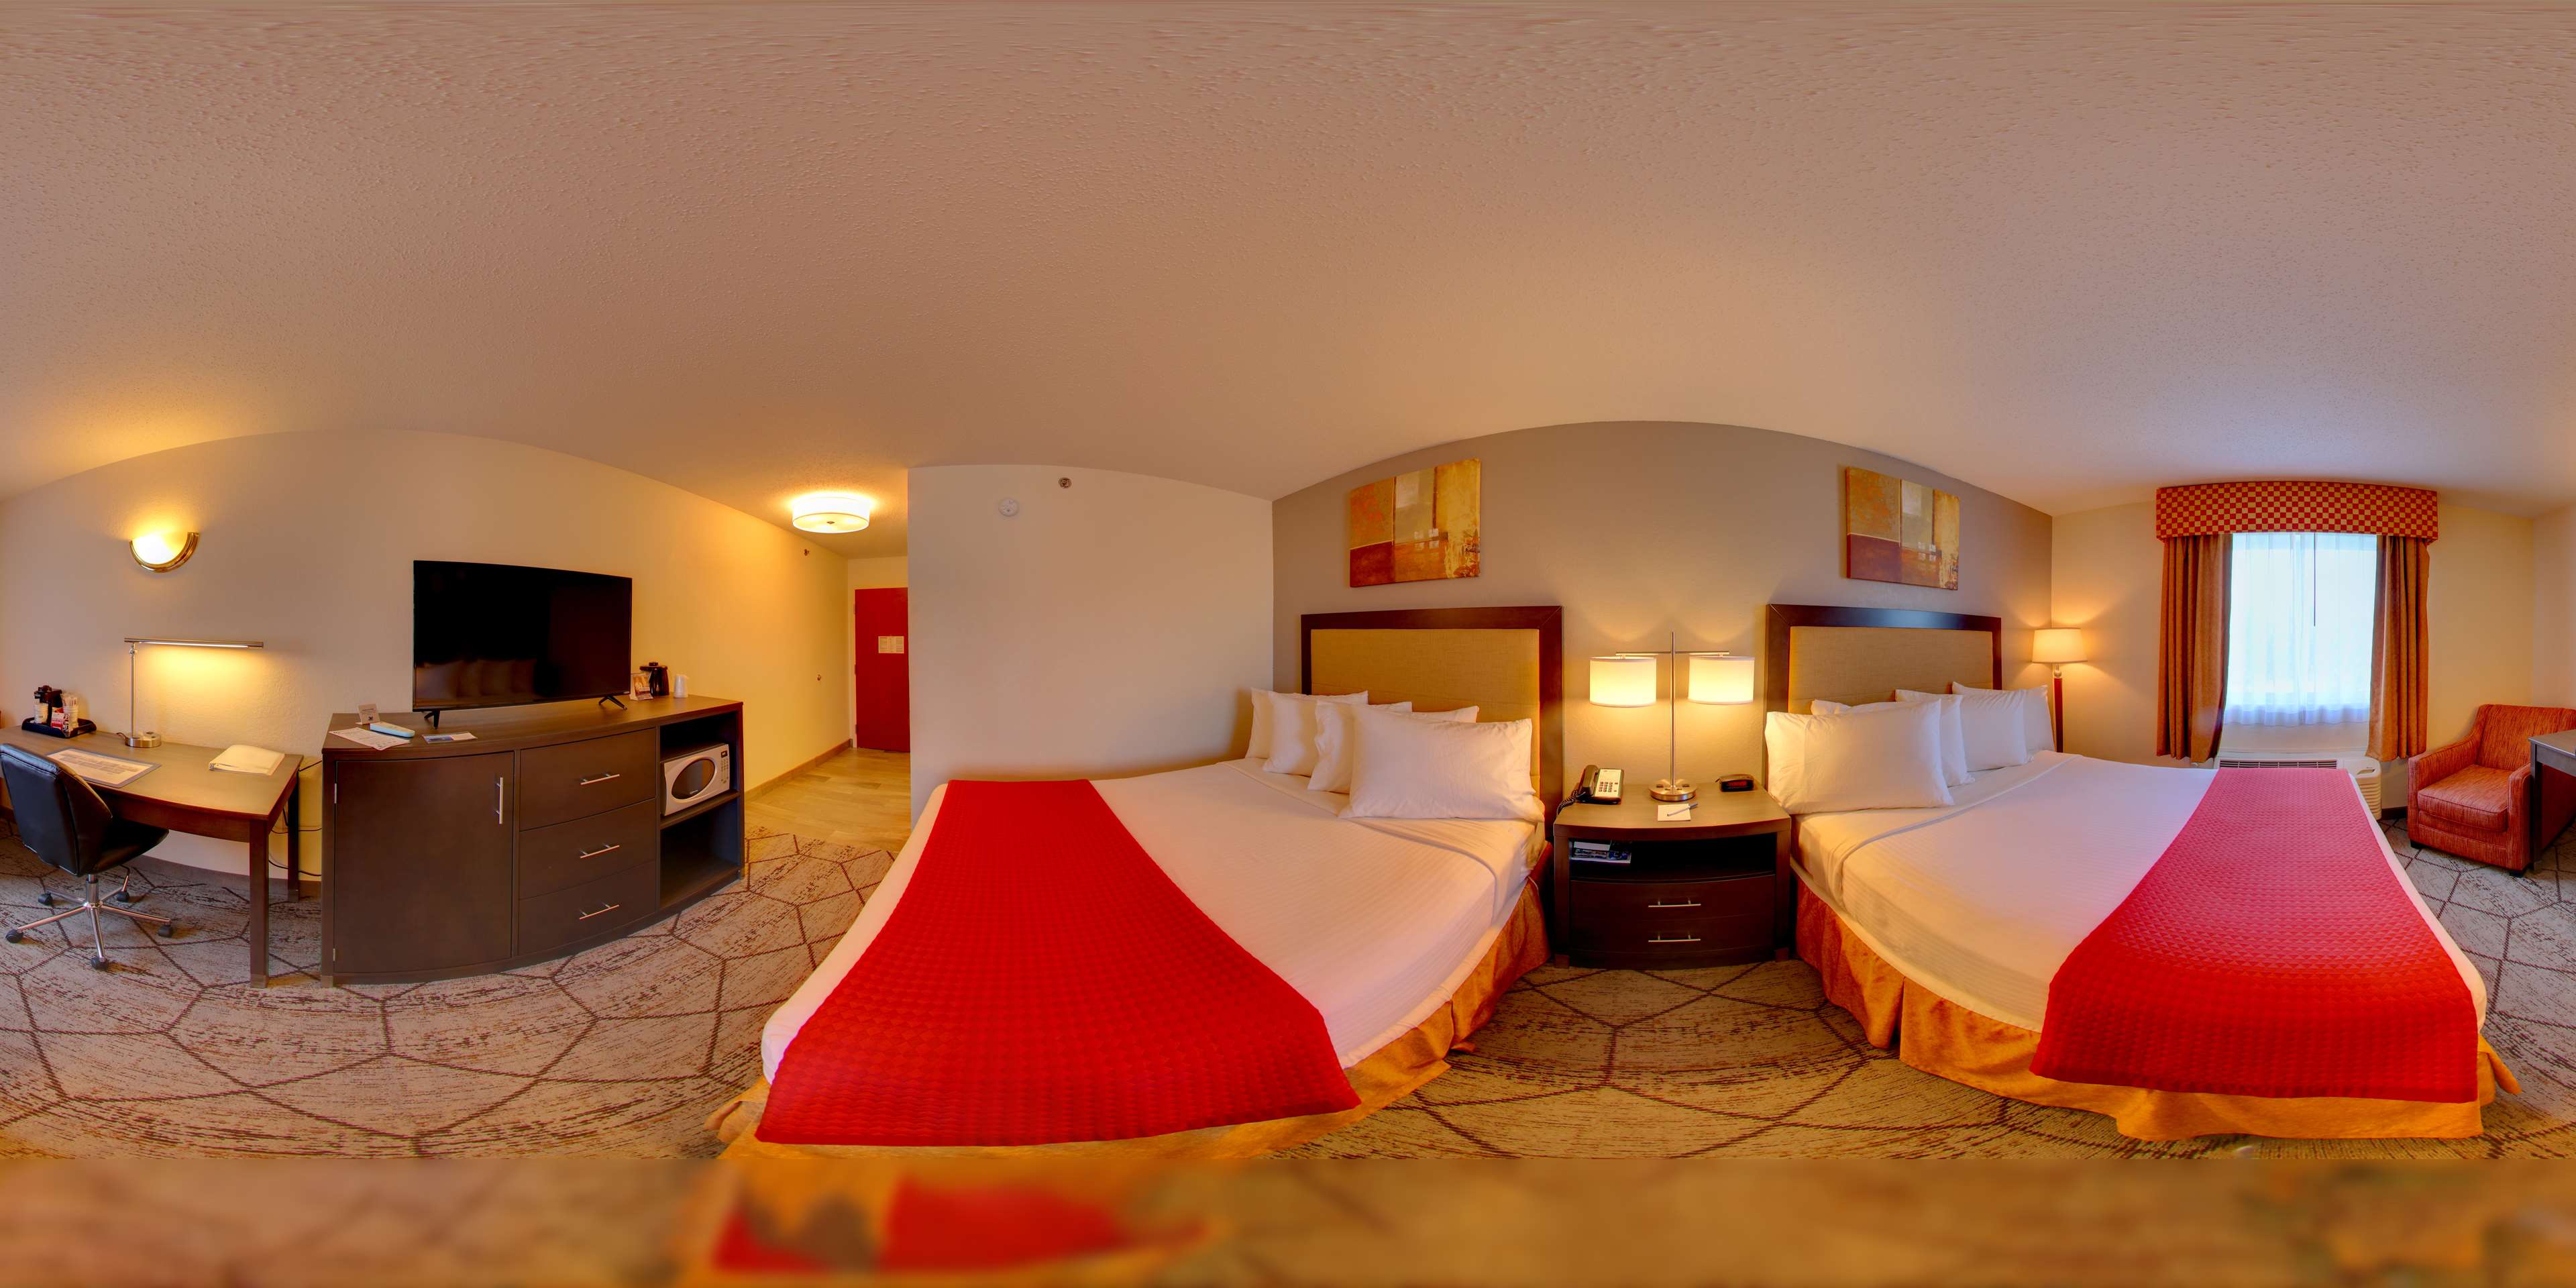 Our double queen guest room is perfect for extended stays or a weekend getaway